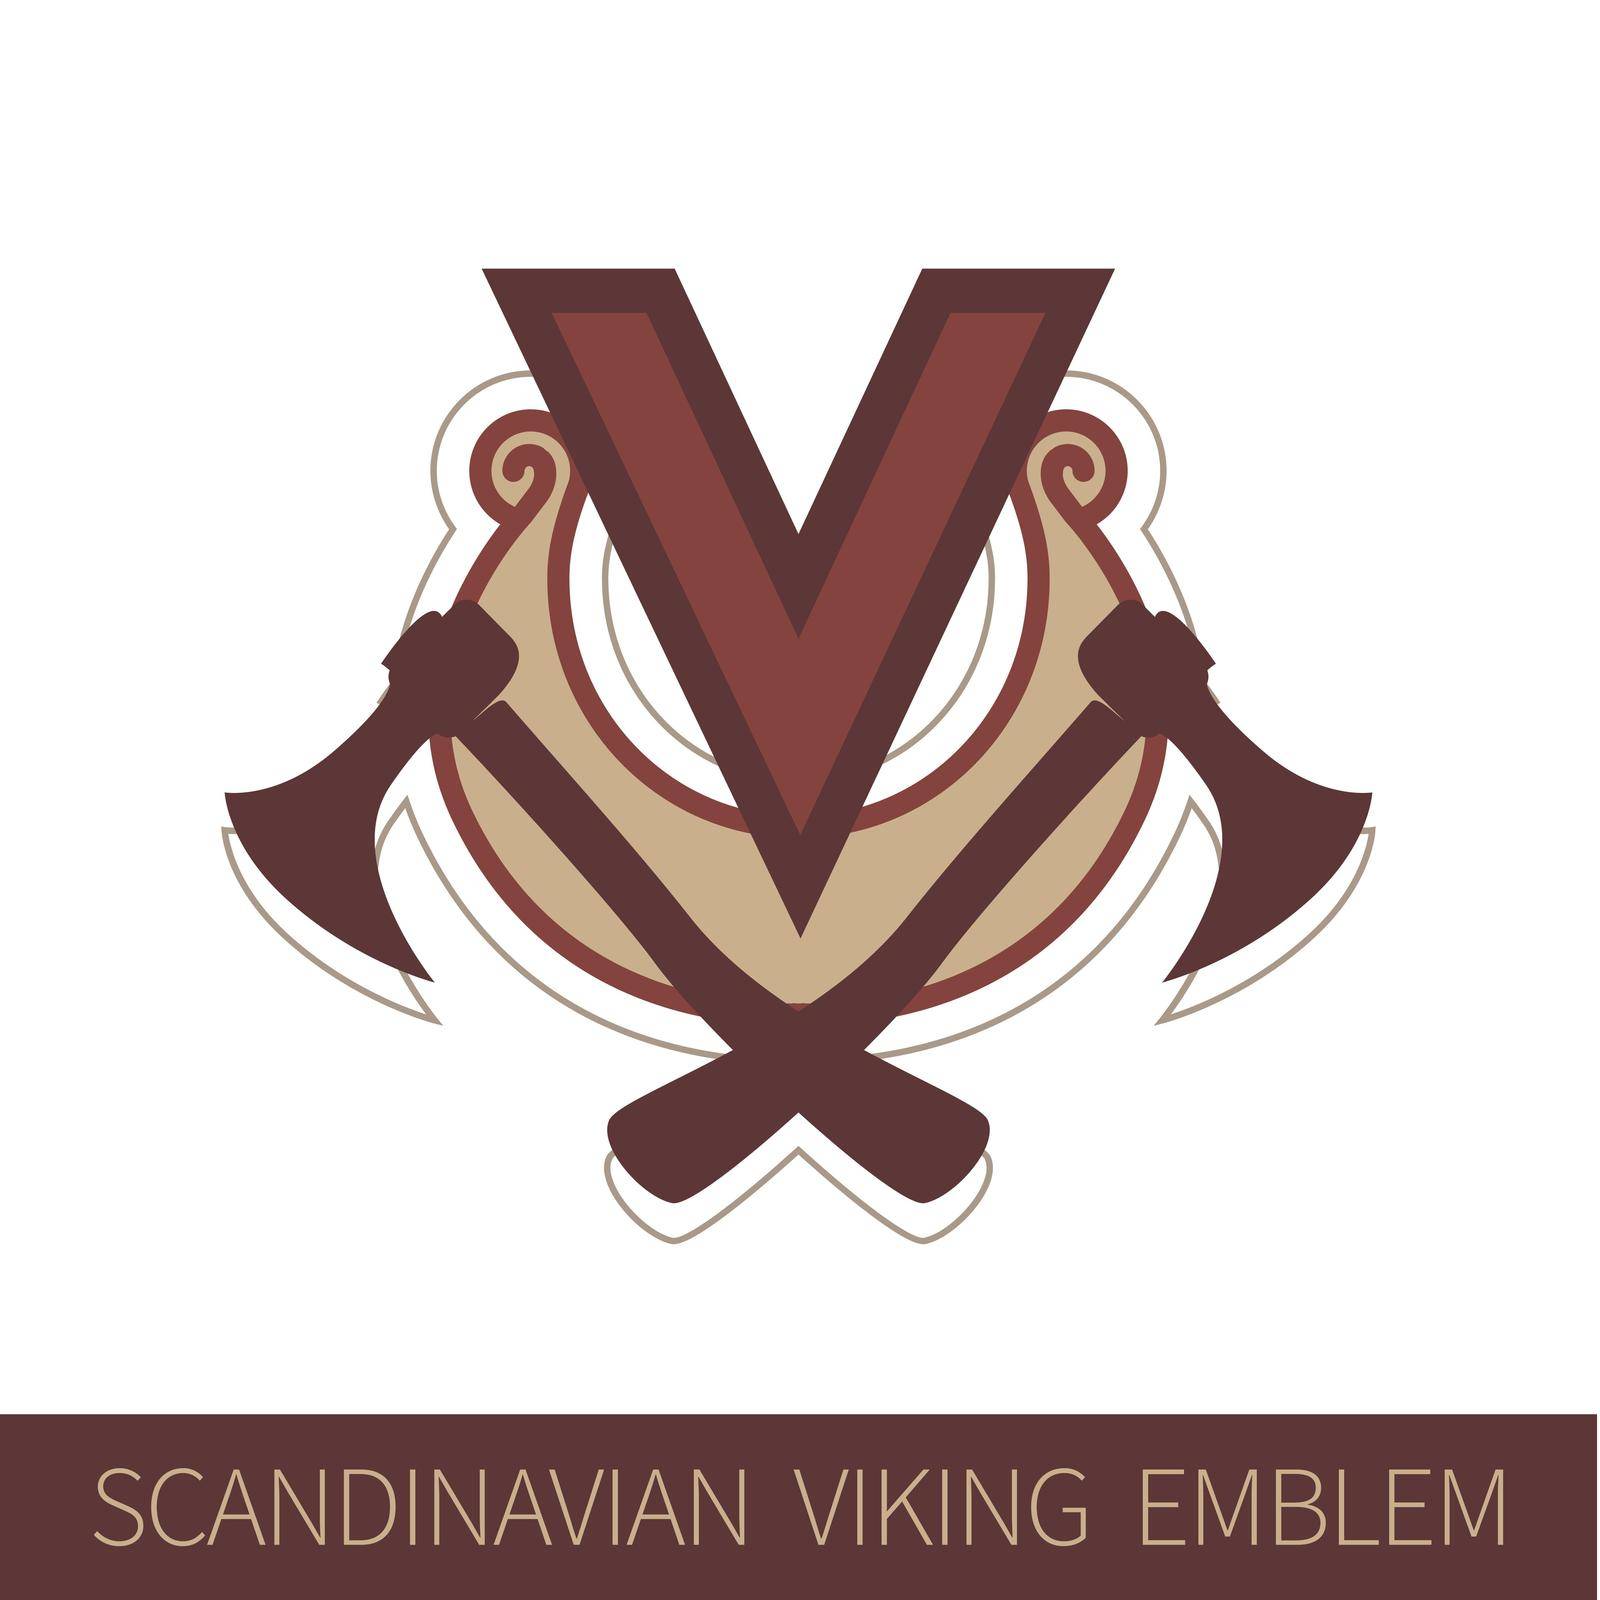 Scandinavian Viking Emblem - Coat of Arms with Letter V and Scandinavian Symbols. Vector Illustration isolated on white background, EPS 10.